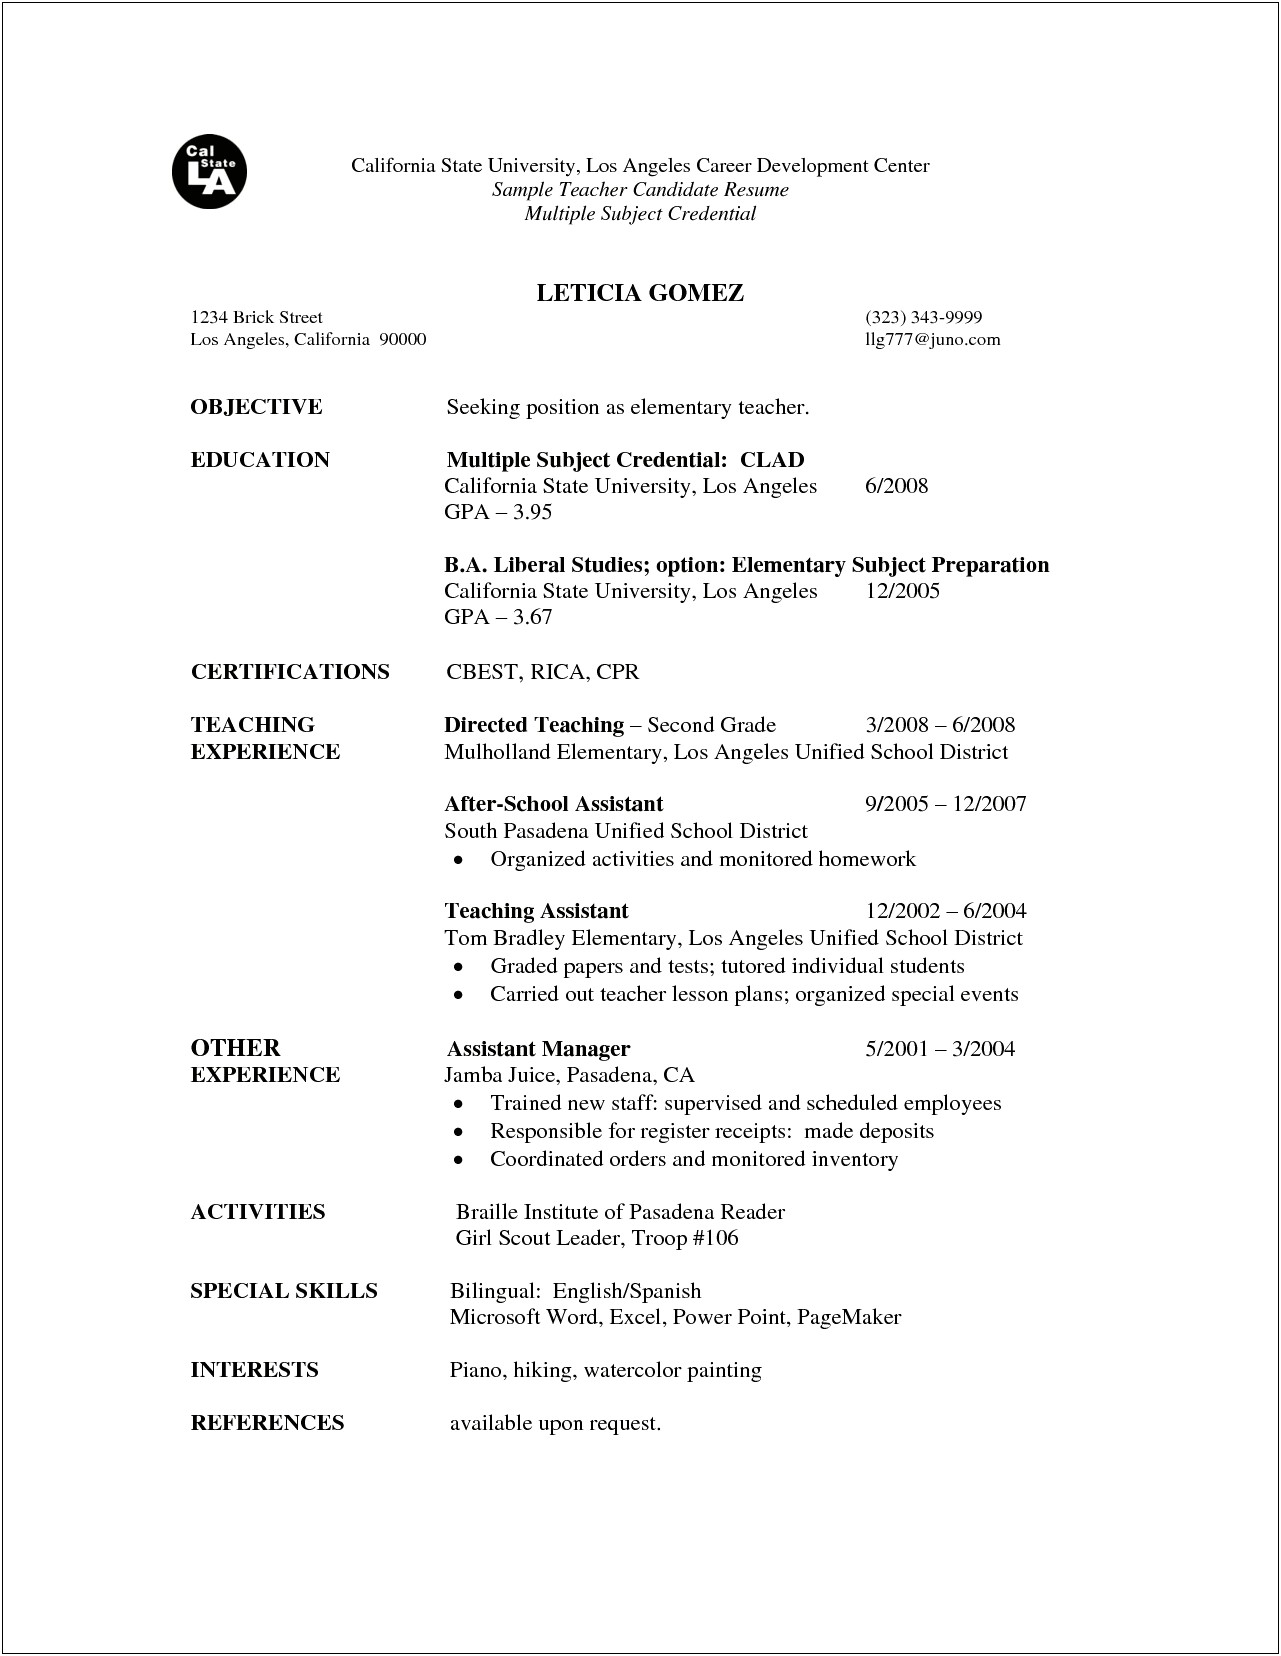 Objective Statement For Teacher Resume Examples